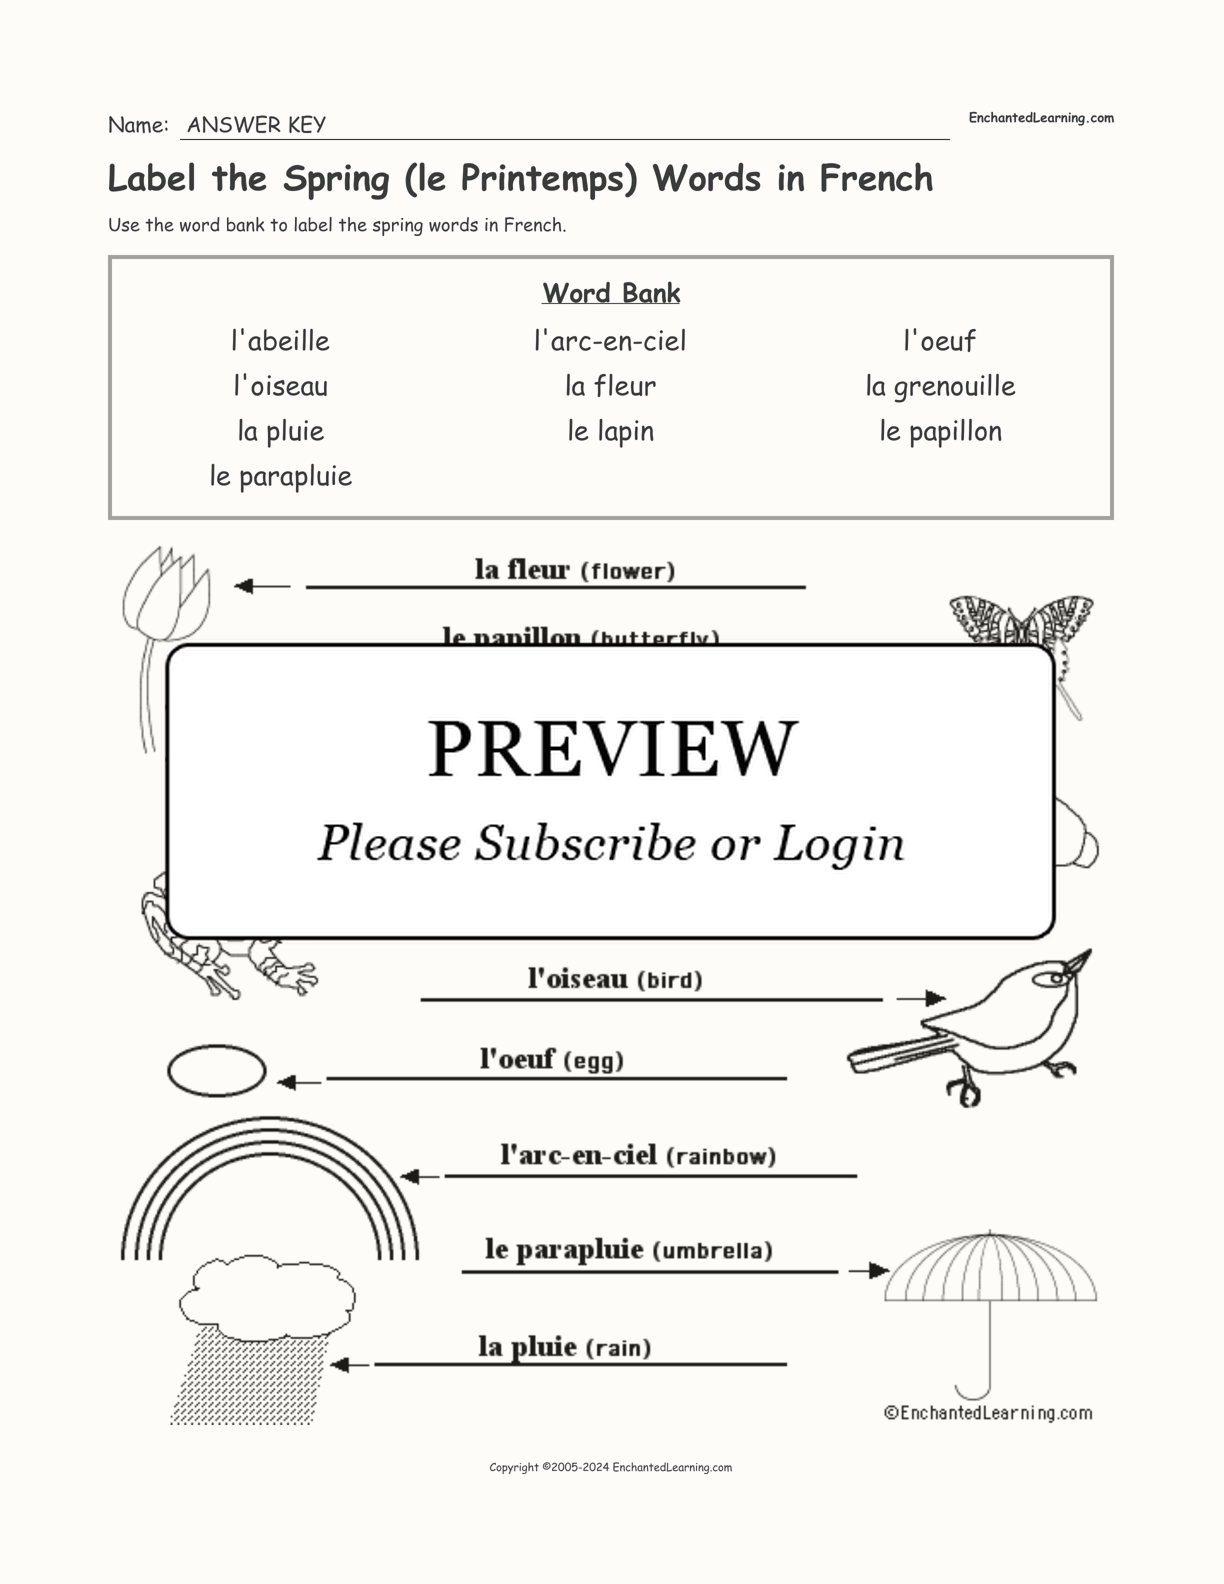 Label the Spring (le Printemps) Words in French interactive worksheet page 2